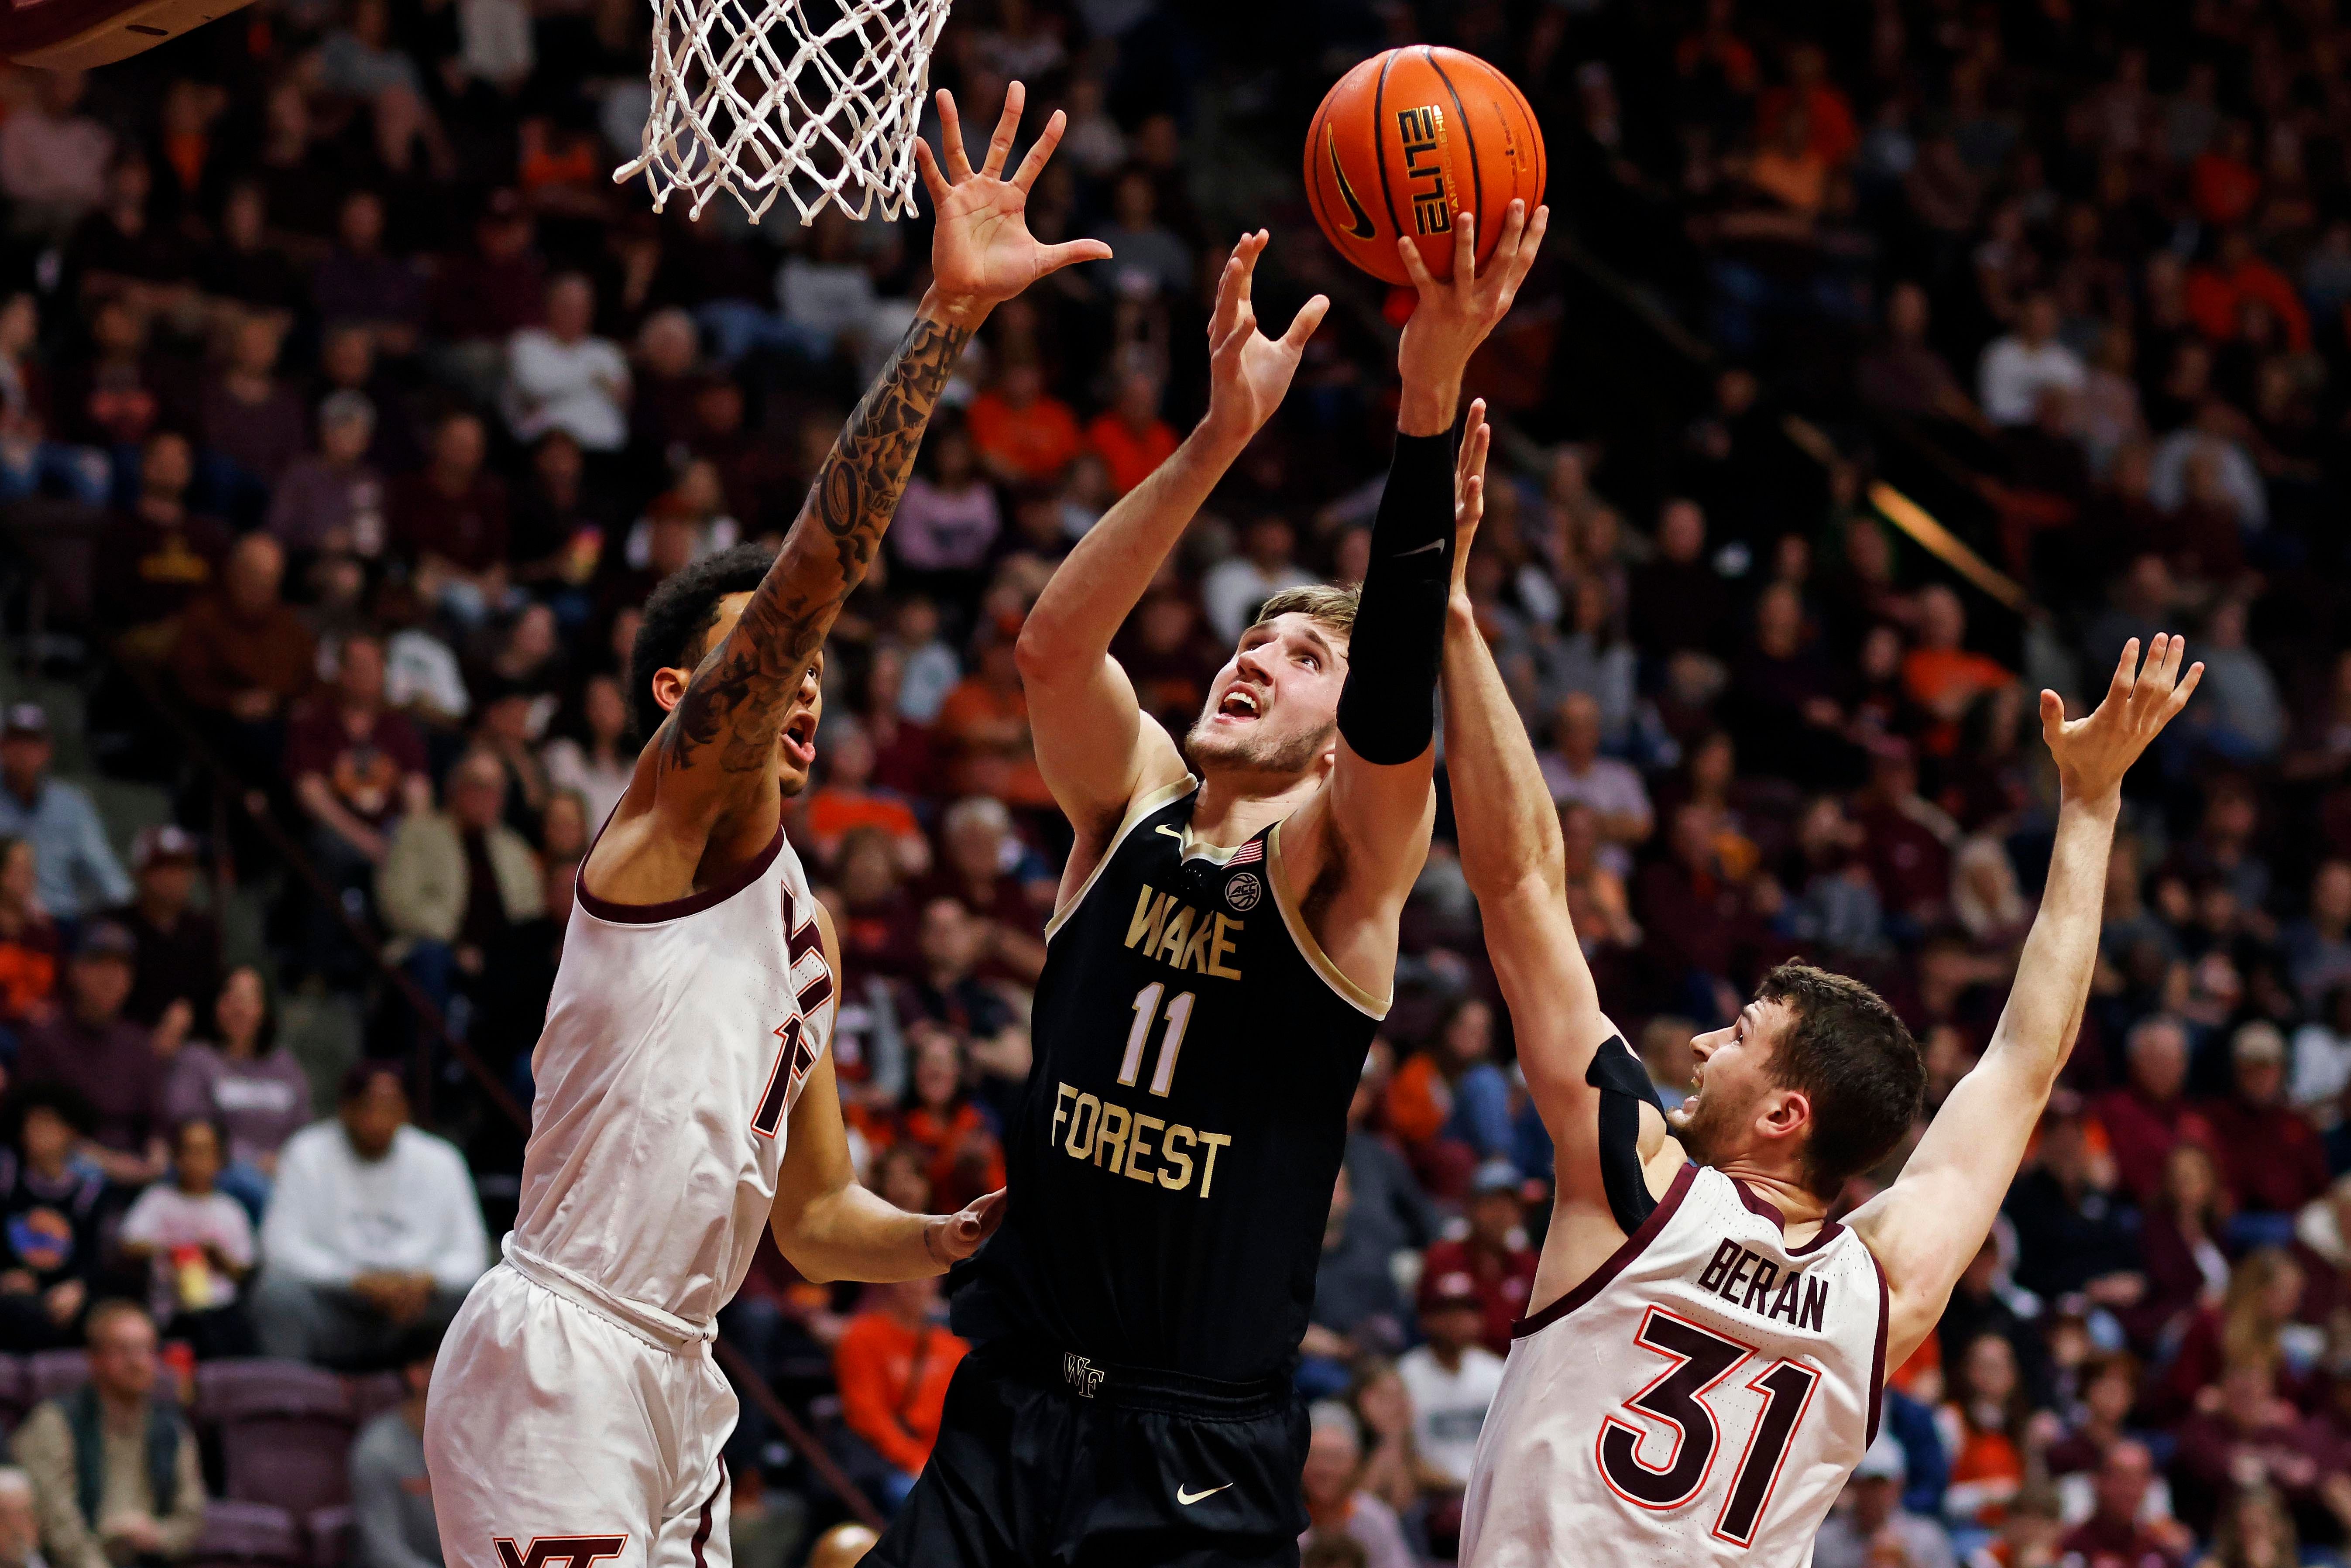 Andrew Carr helped Wake Forest make the second round of the NIT.